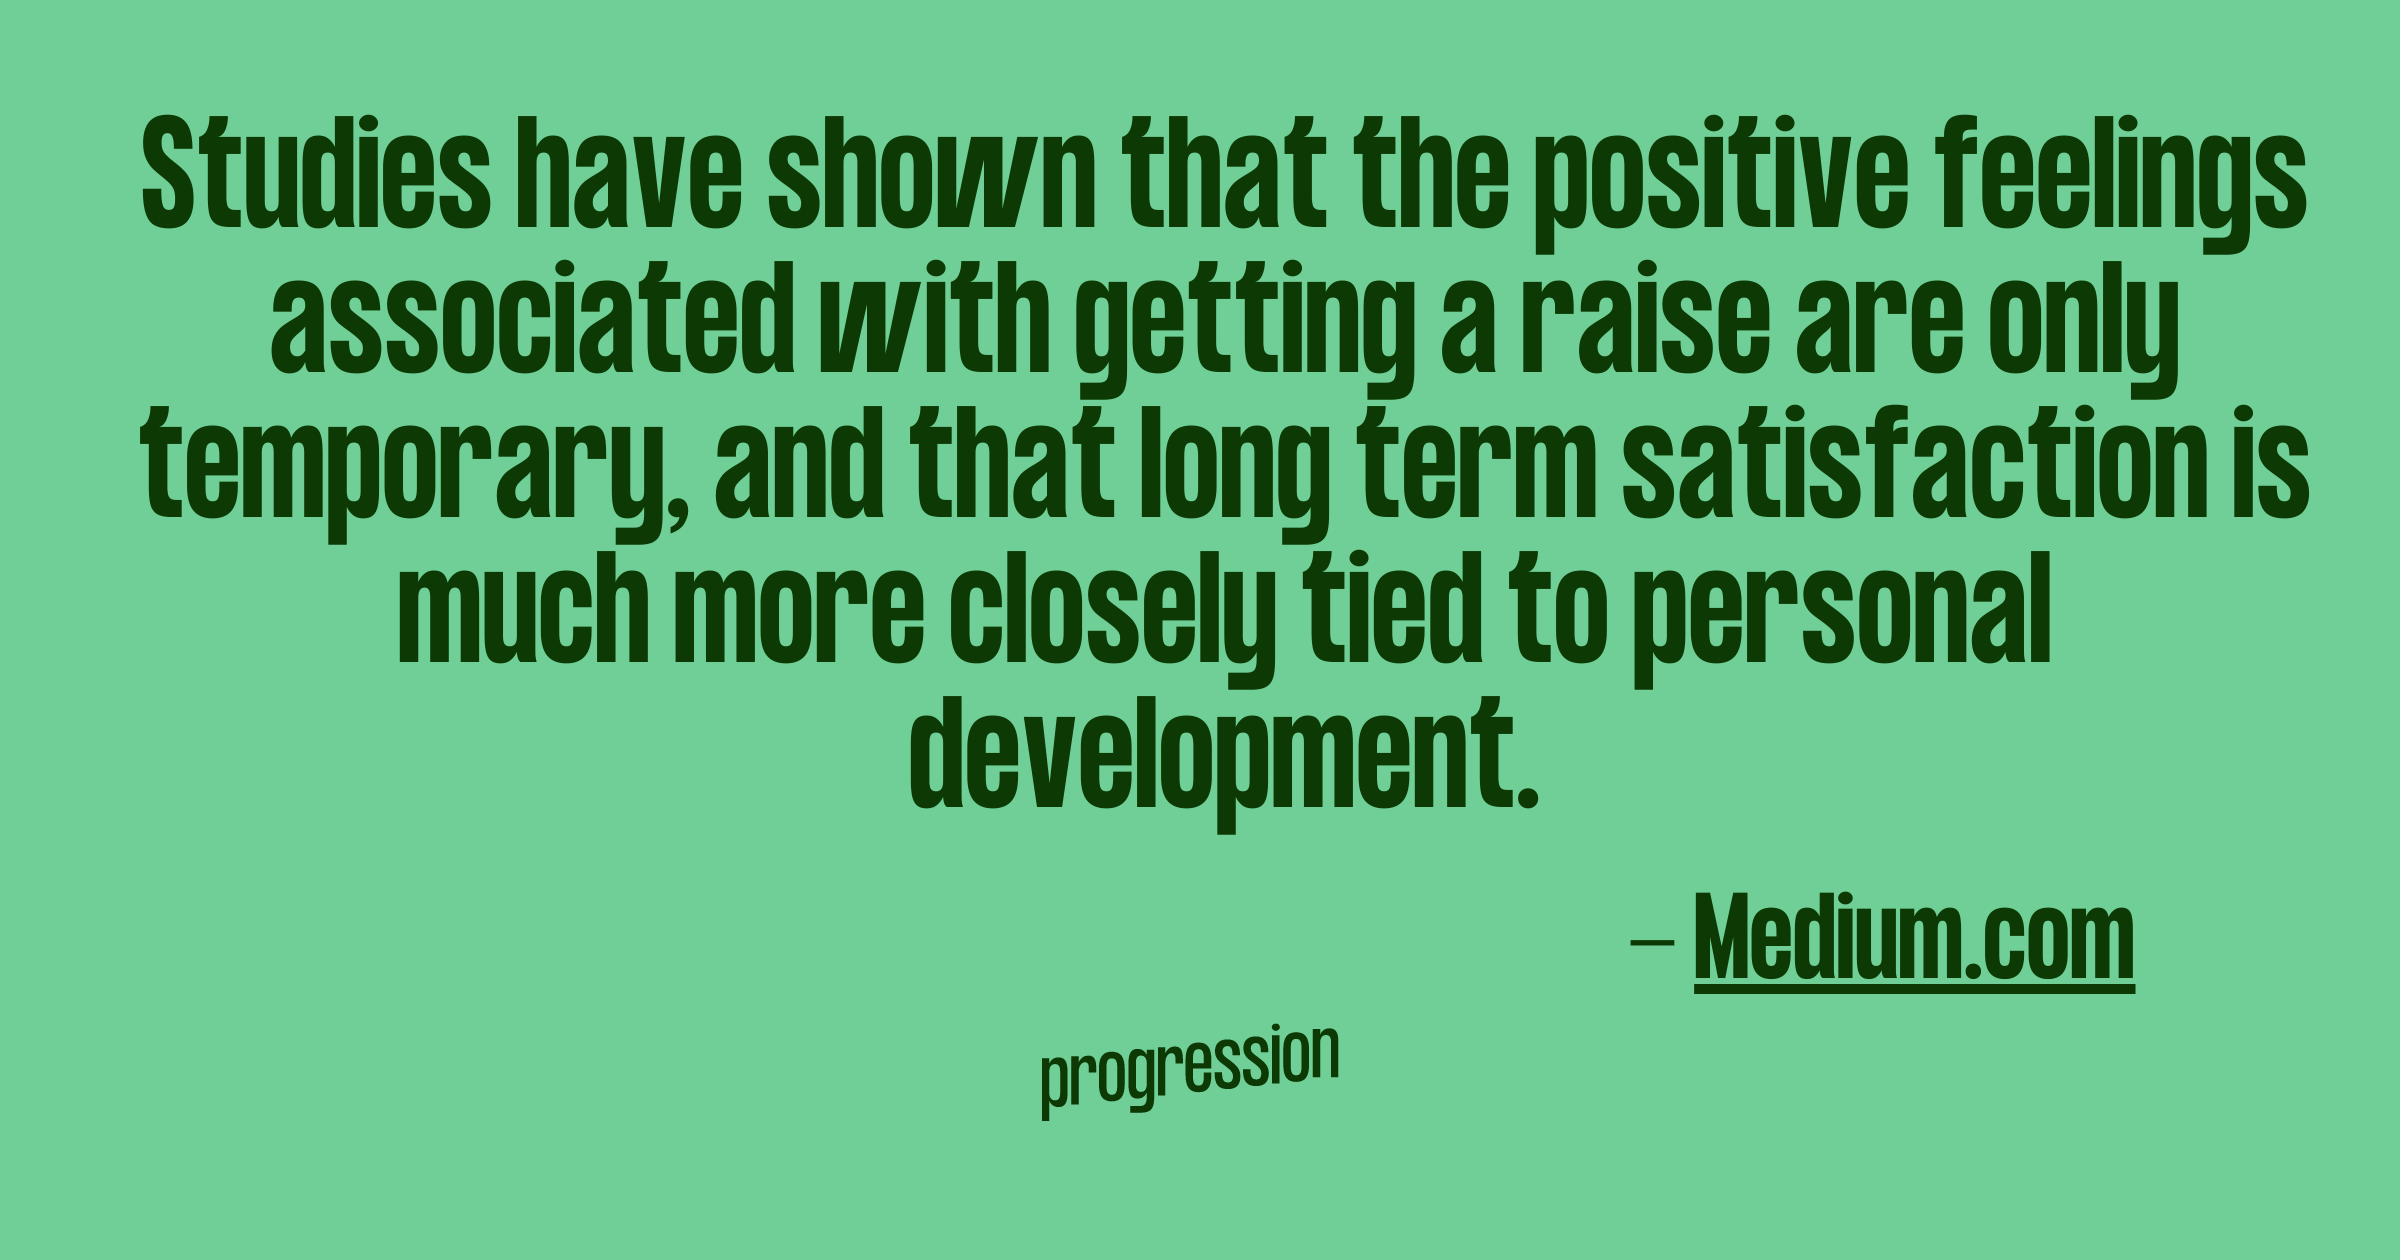 Quote from Medium.com saying studies have shown that the positive feelings associated with getting a raise are only temporary, and that long term satisfaction is much more closely tied to personal development